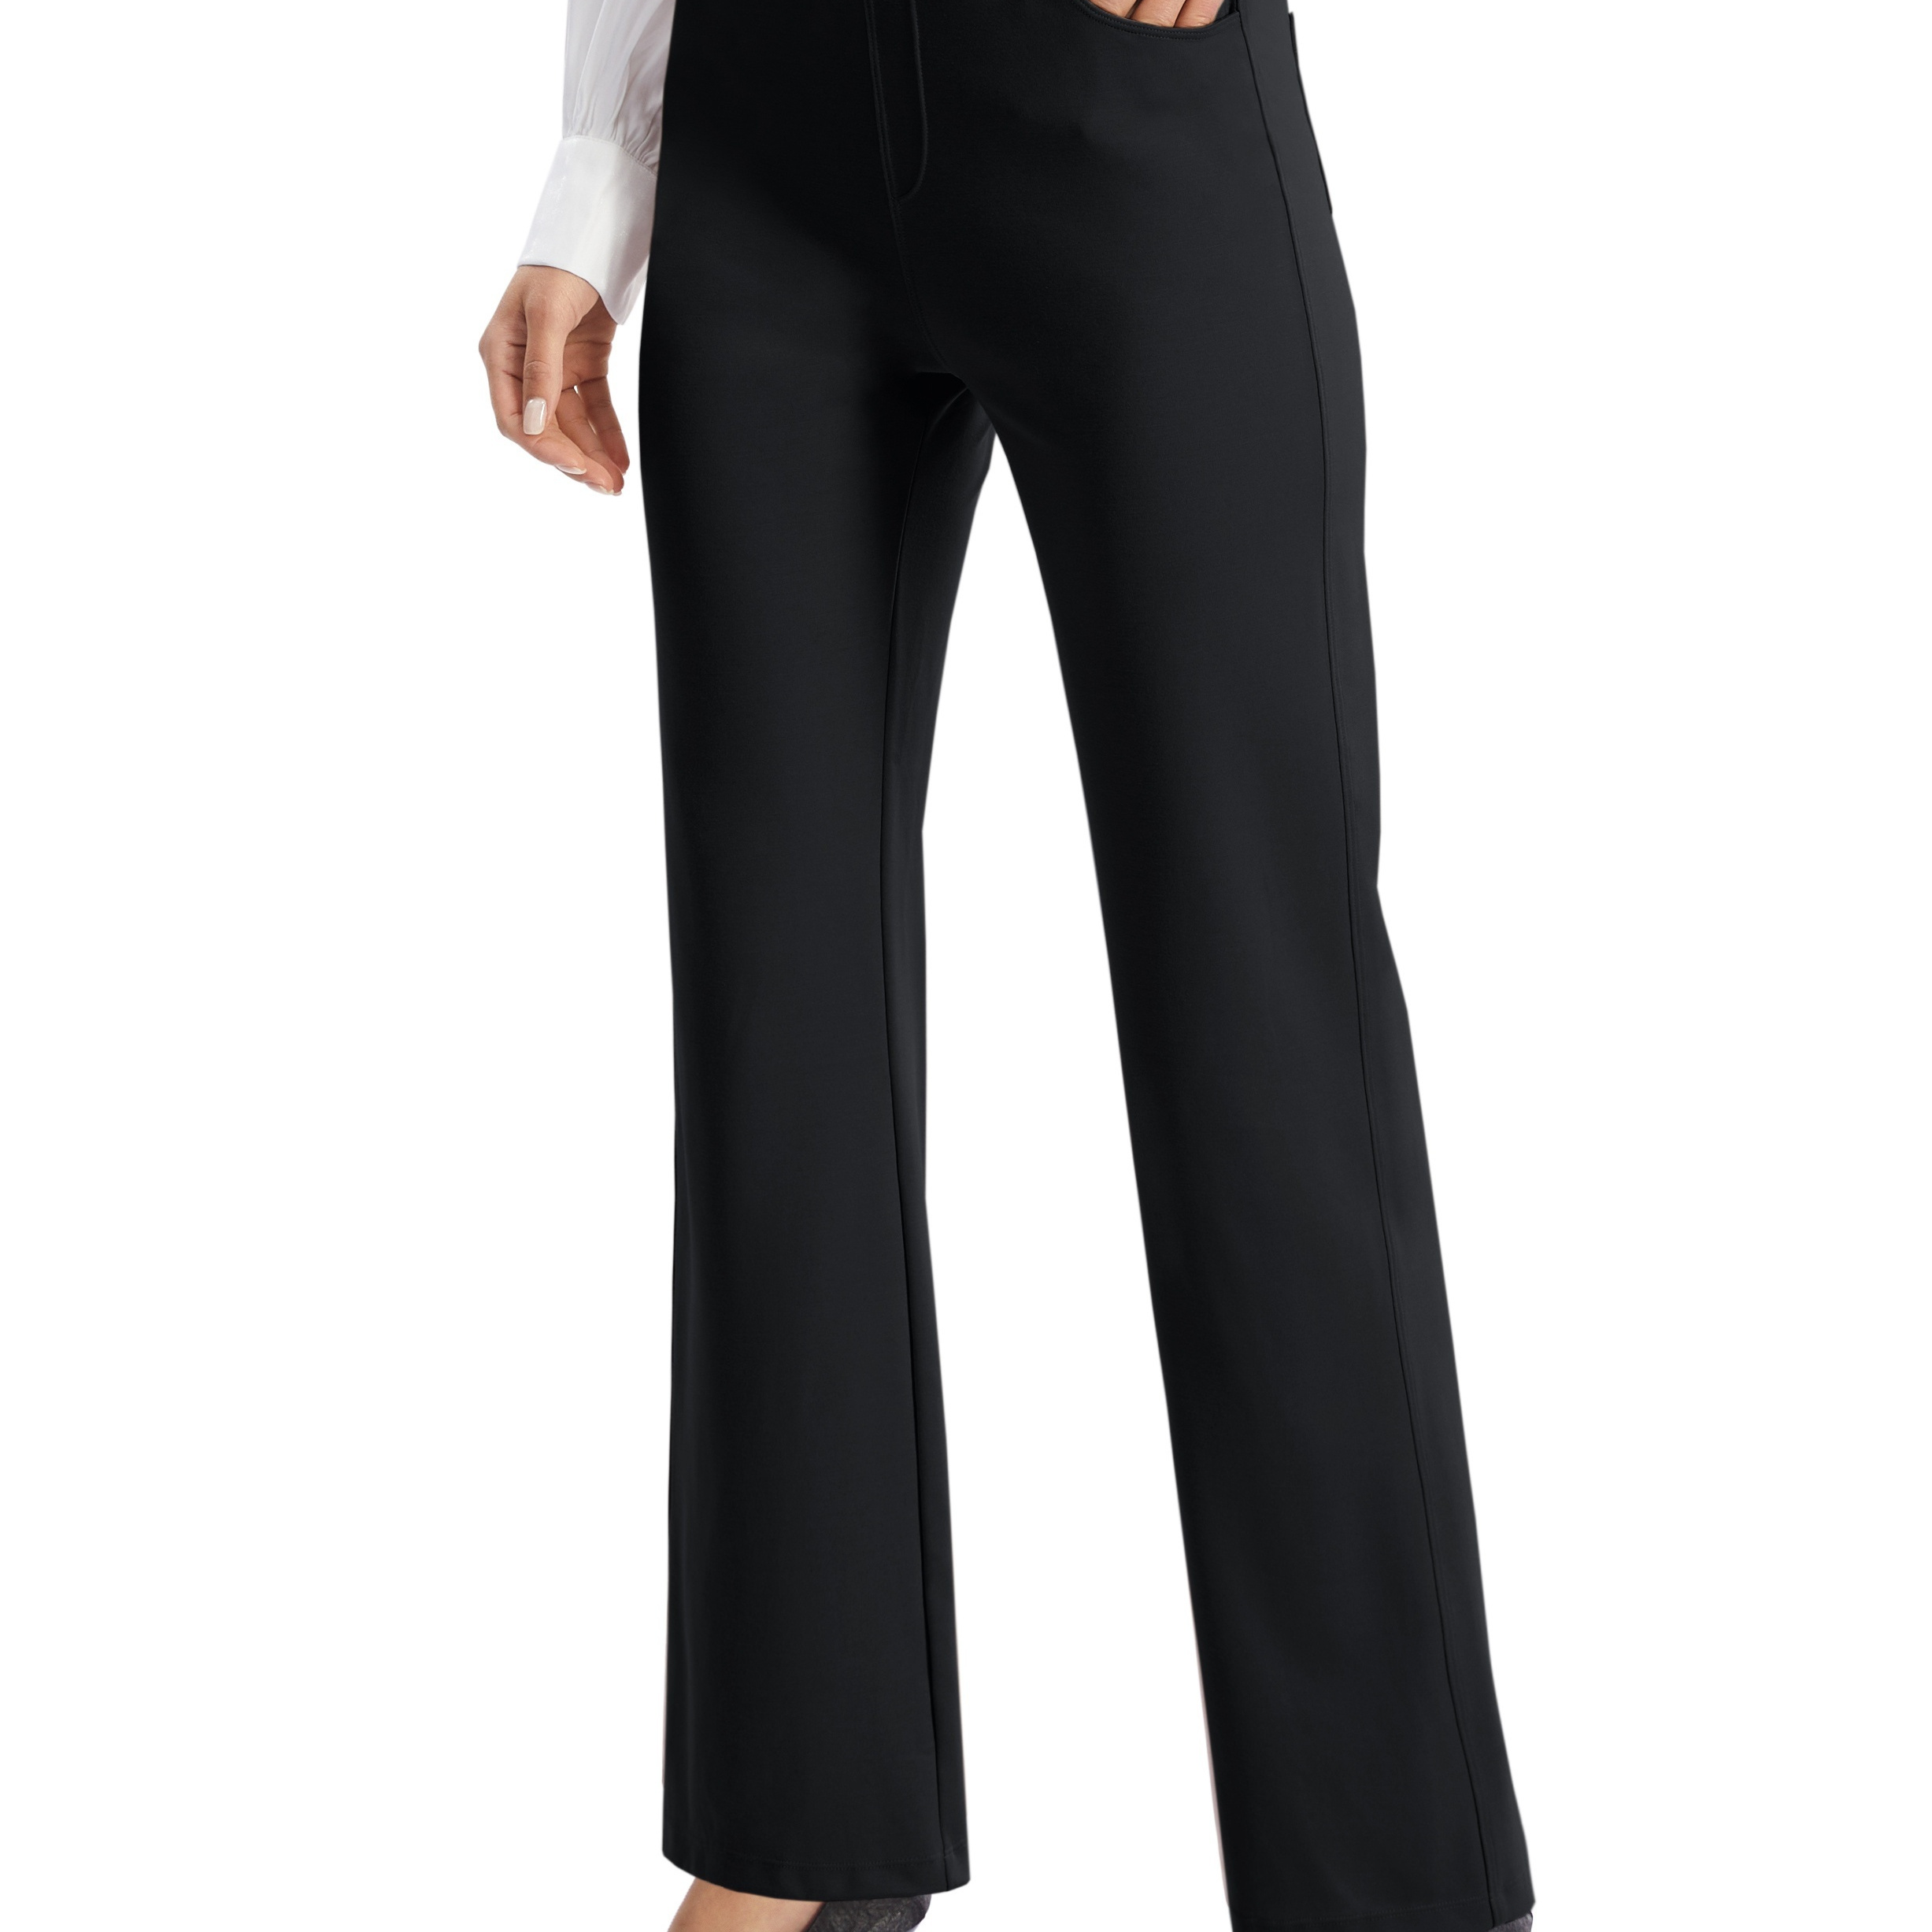 

Solid Color Slim Straight Leg Pants, Elegant High Waist Office Business Pants With Pocket, Women's Clothing